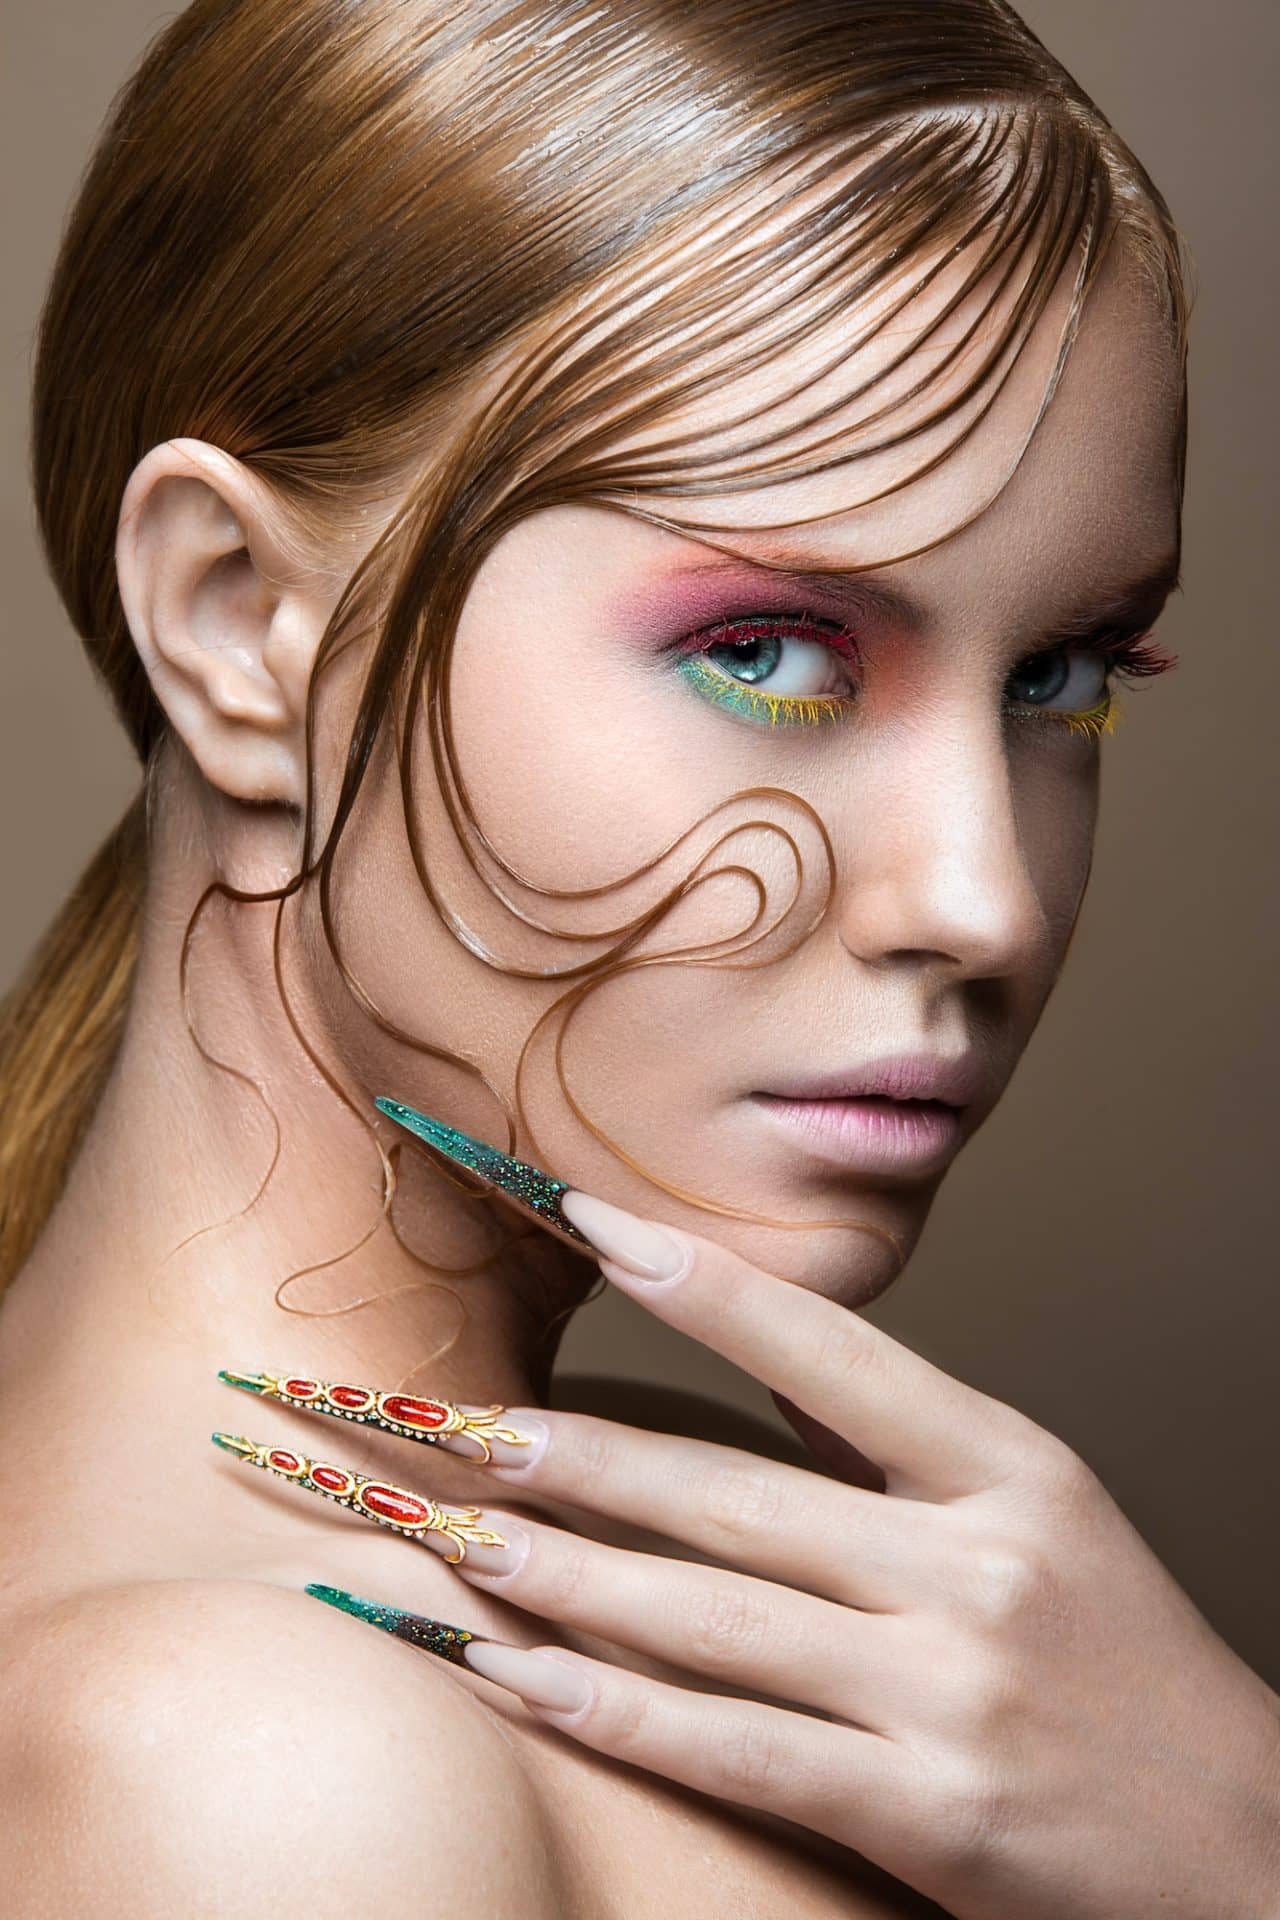 Beautiful girl with bright fashion make-up, creative hairstyle, long nails. Design manicure.